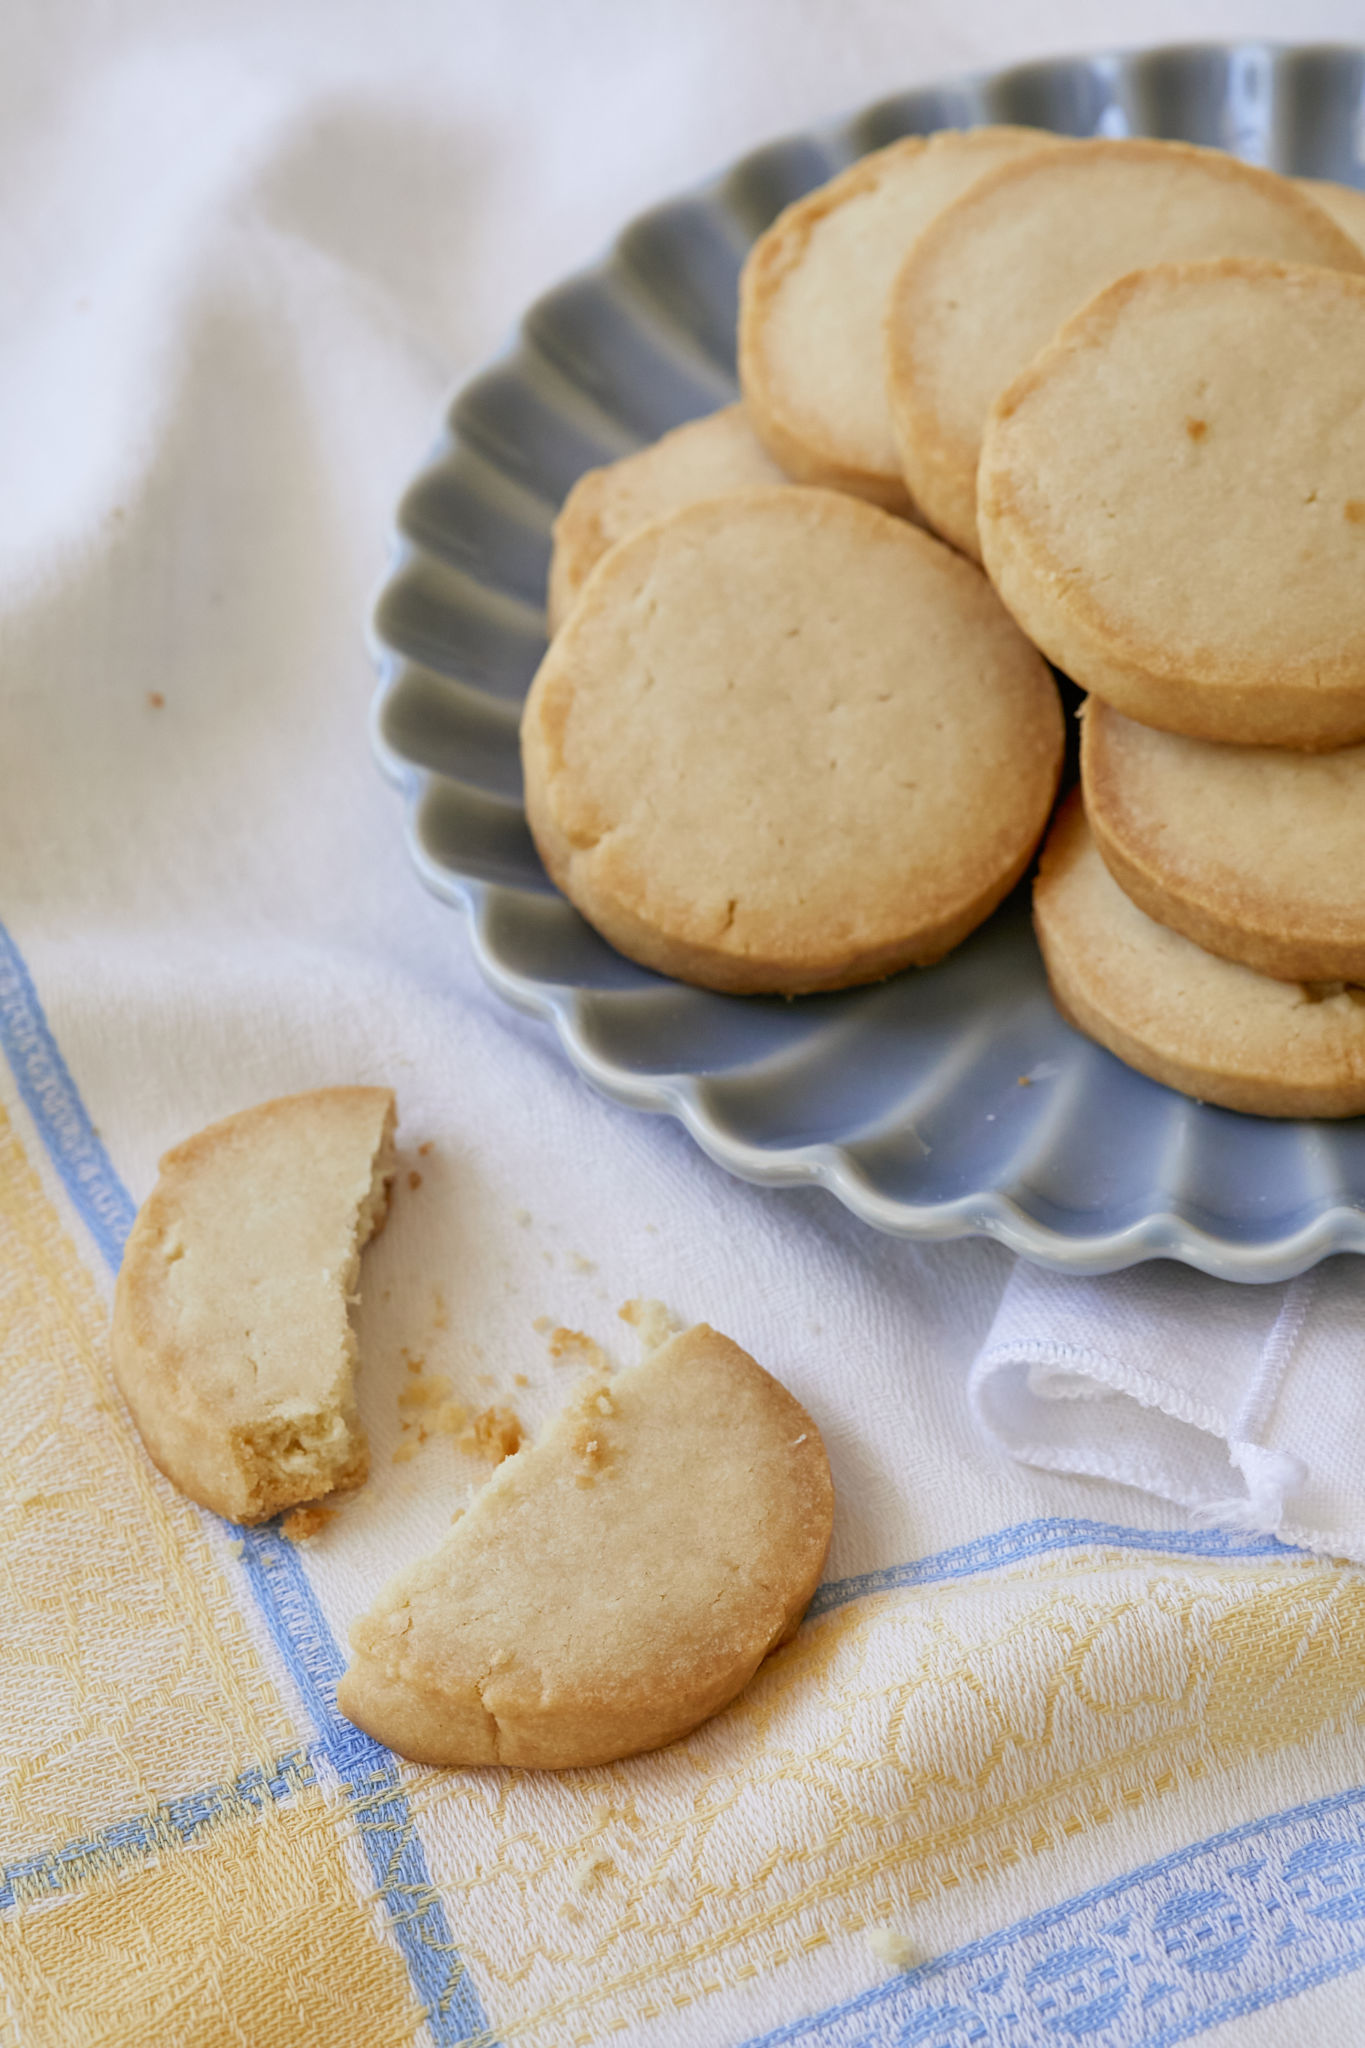 Homemade shortbread cookies are served on a blue dish. One 3 ingredient shortbread cookie is snapped in half, showing how a crispy cookie.